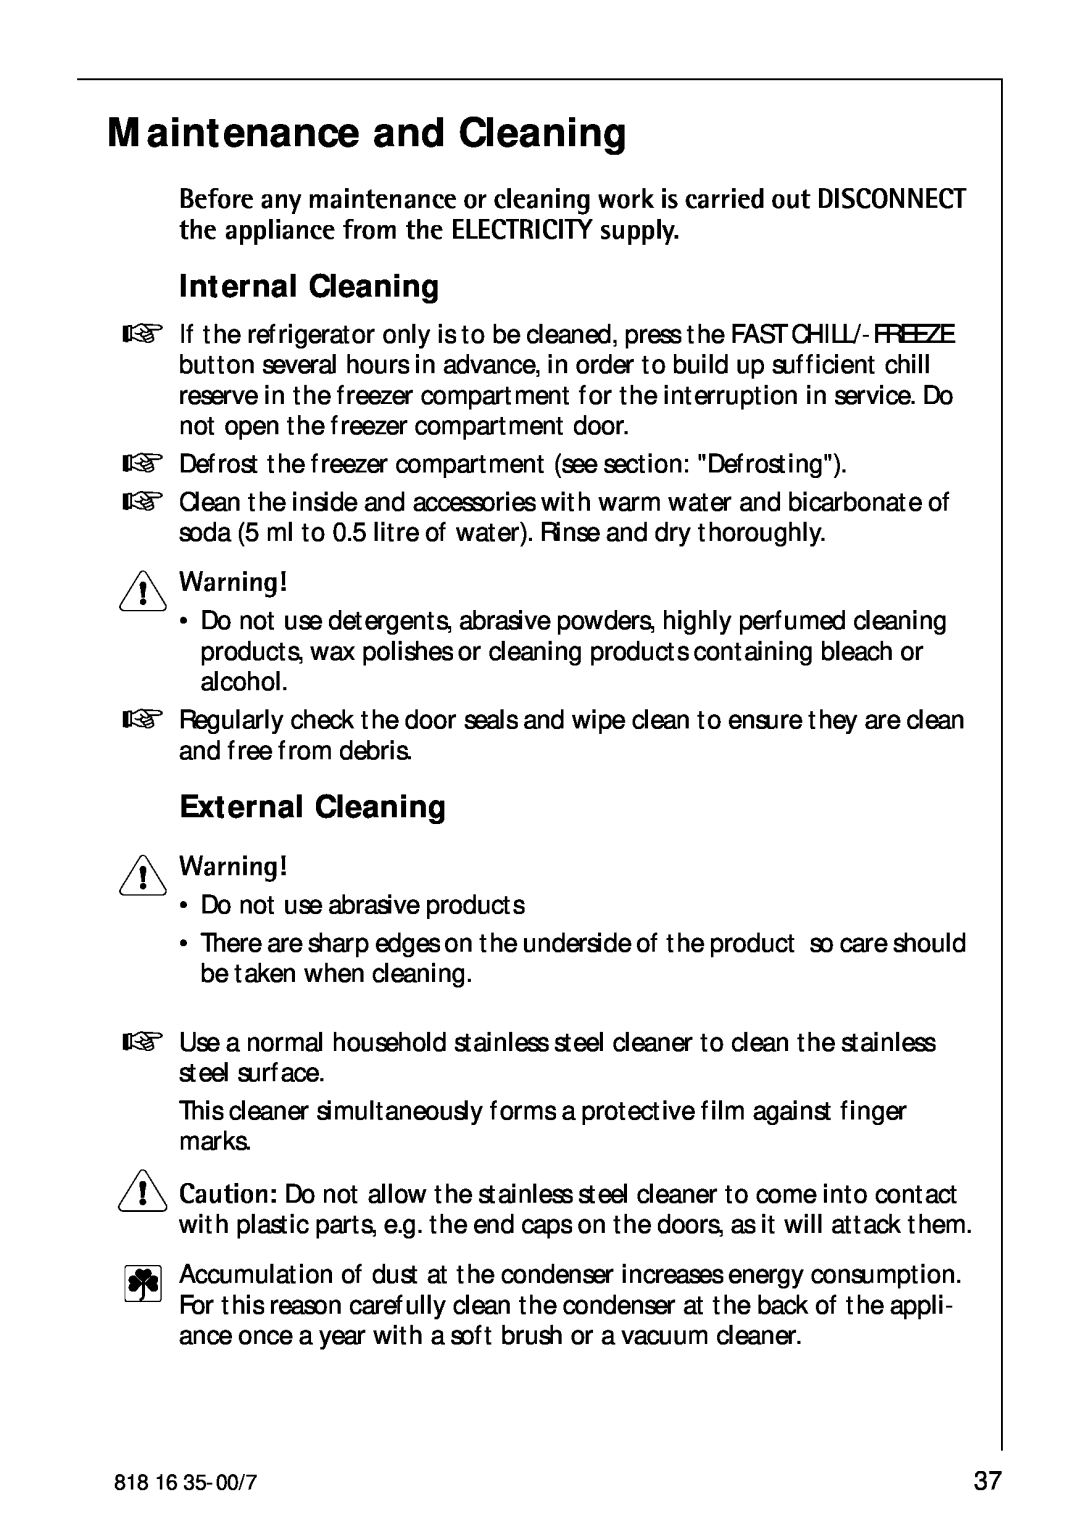 Electrolux KO_SANTO 4085 operating instructions Maintenance and Cleaning, Internal Cleaning, External Cleaning, Warning 